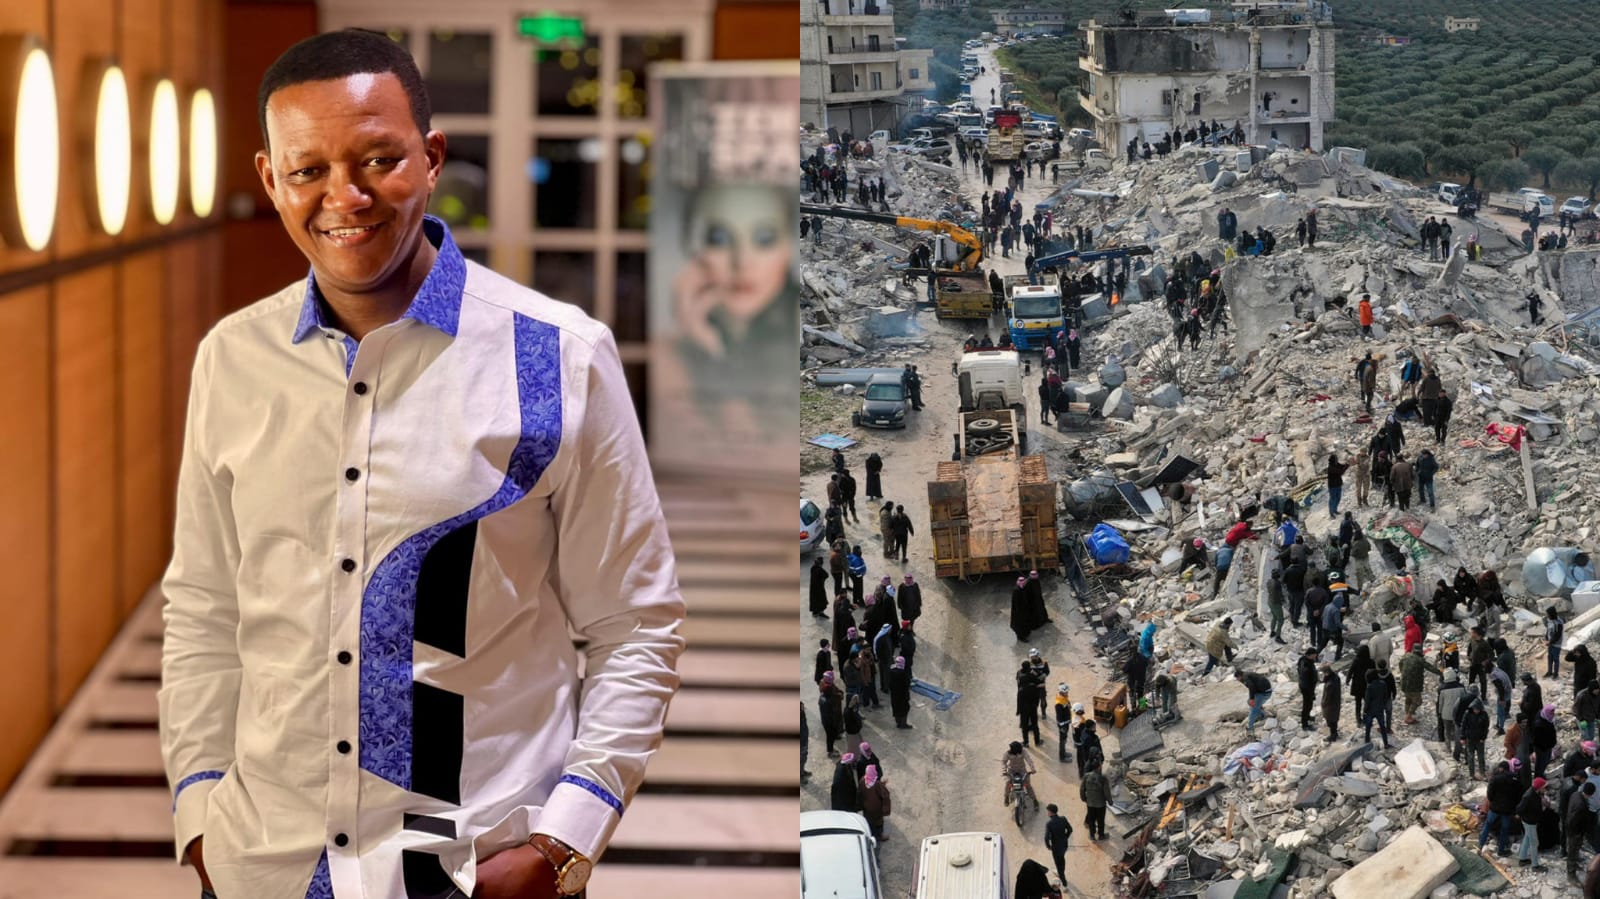 Foreign Affairs CS Alfred Mutua Calls On Kenyans To Donate Clothings, Food Stuff To Aid Those Affected By Turkey, Syria Quake